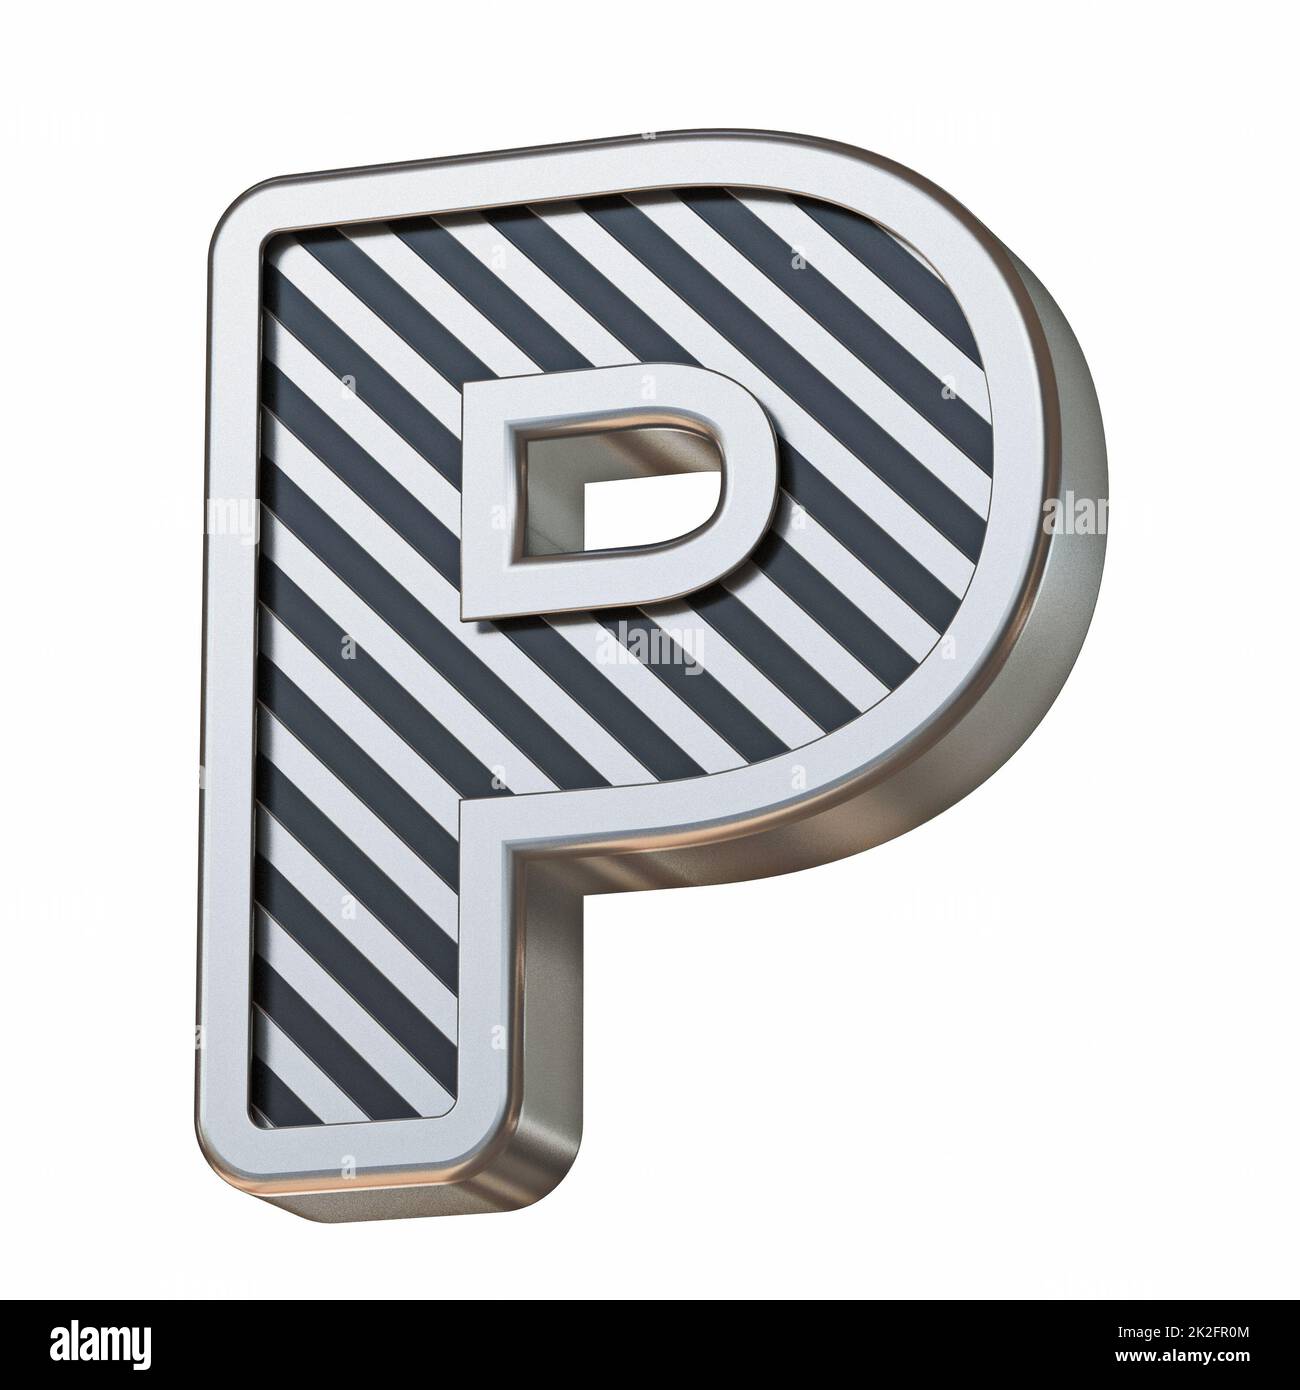 Stainless steel and black stripes font Letter P 3D Stock Photo